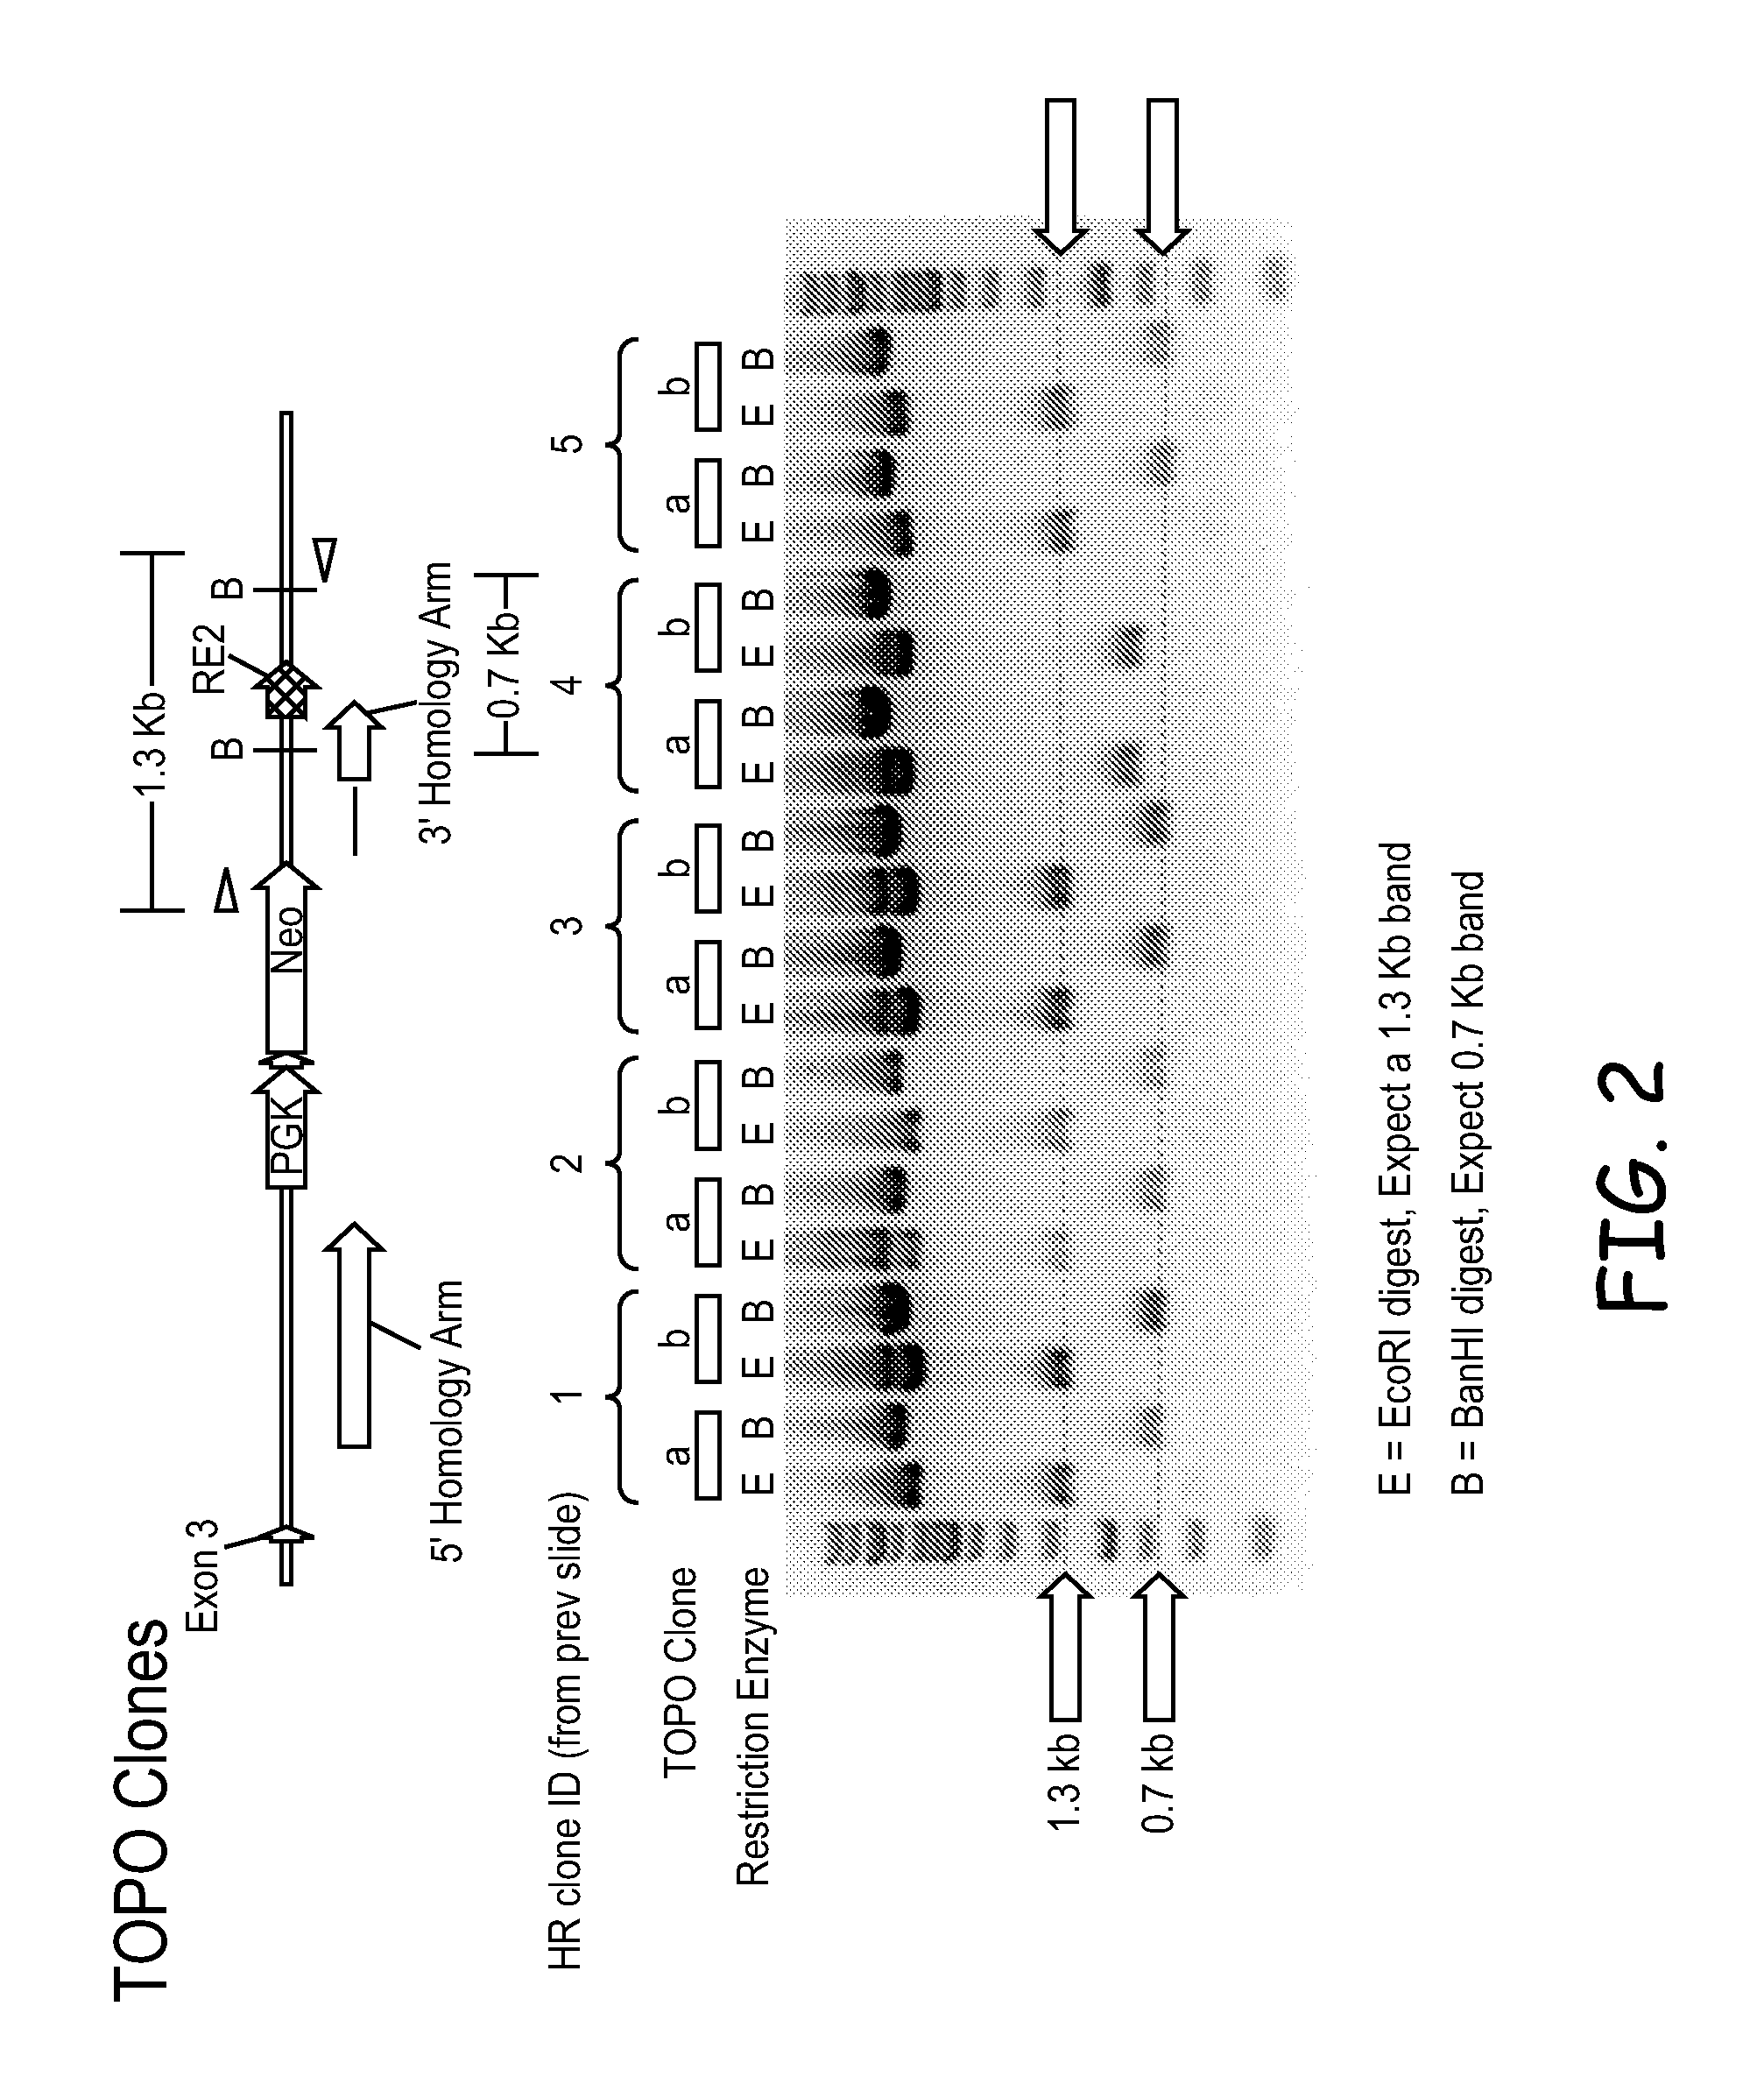 Methods and materials for producing transgenic artiodactyls